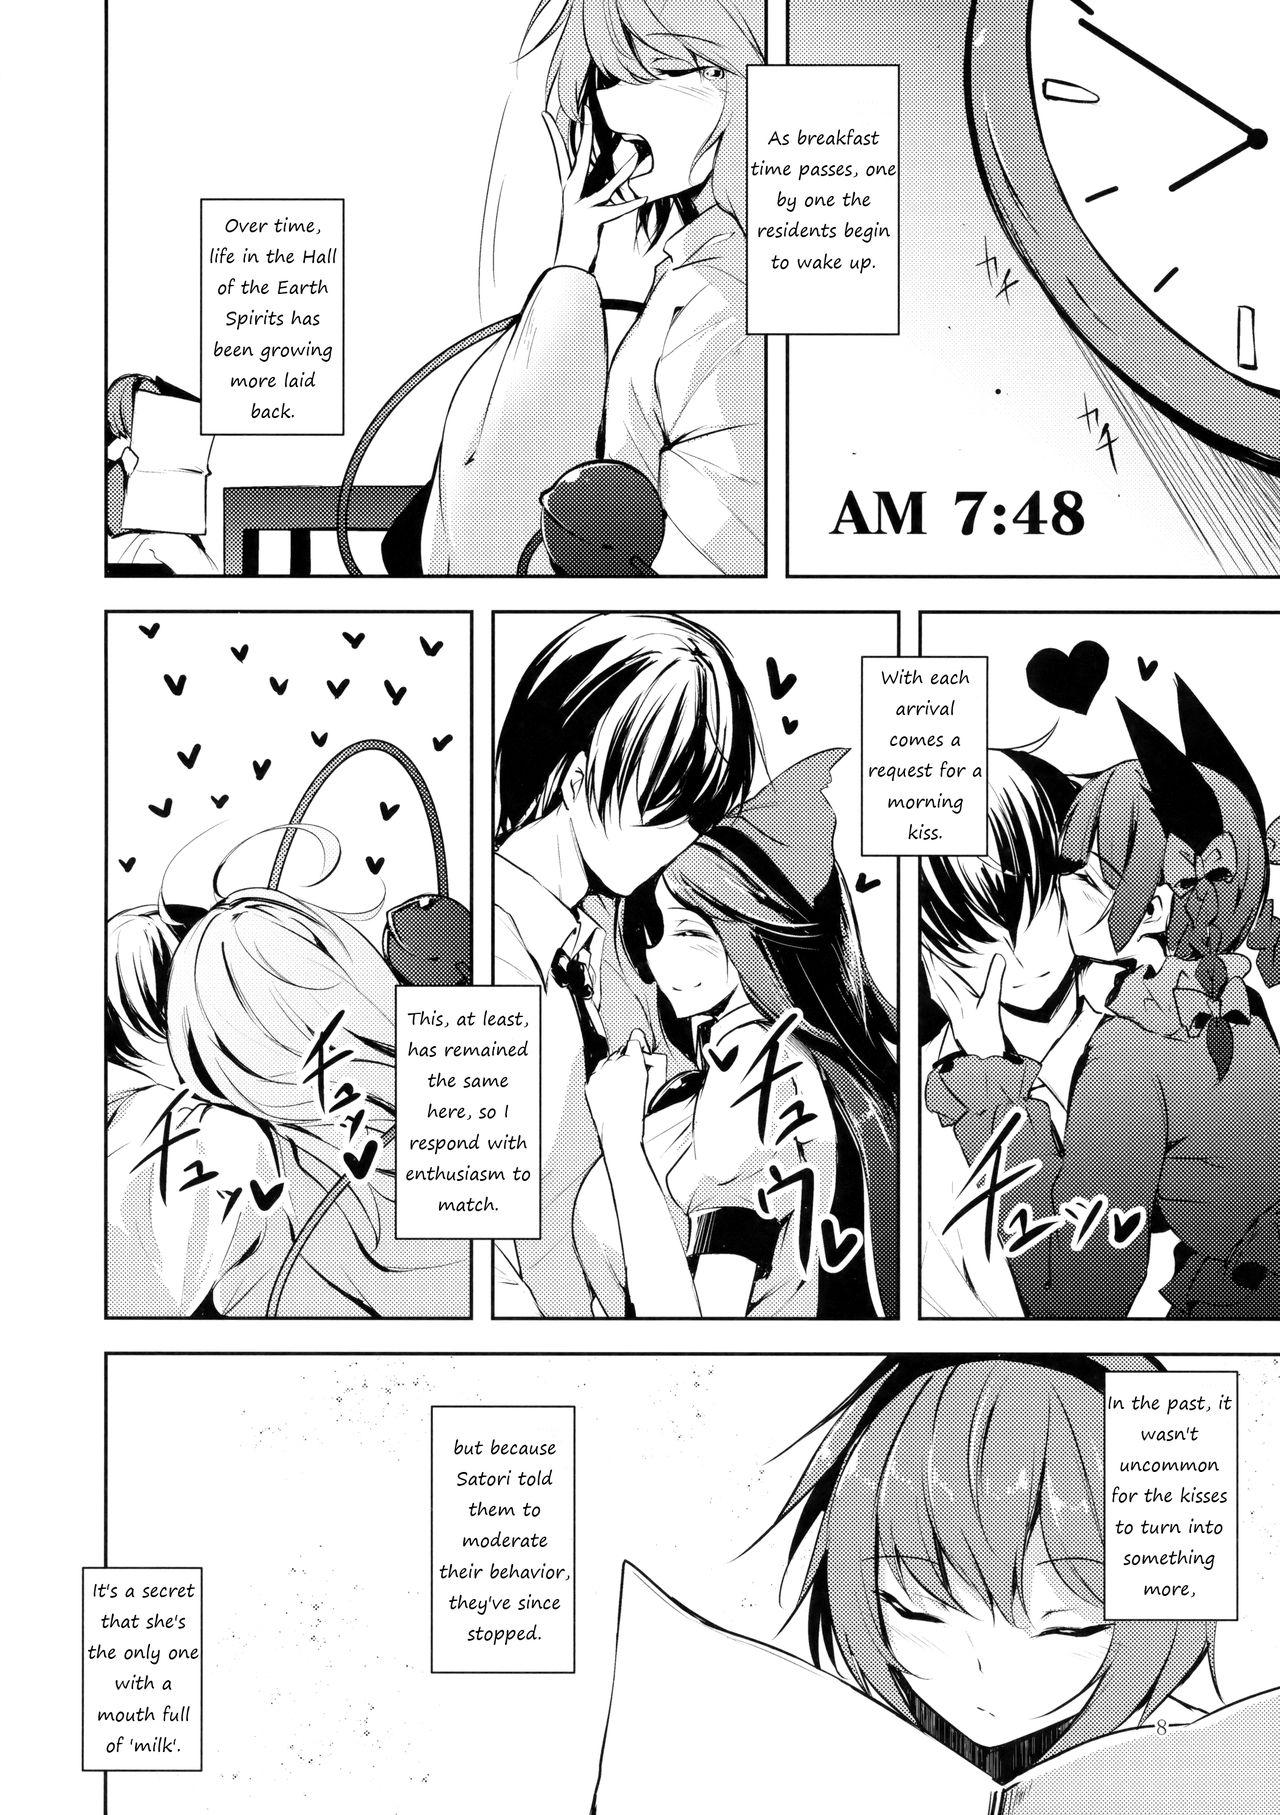 Fitness Komeiji Schedule AM - Touhou project Gostosas - Page 9